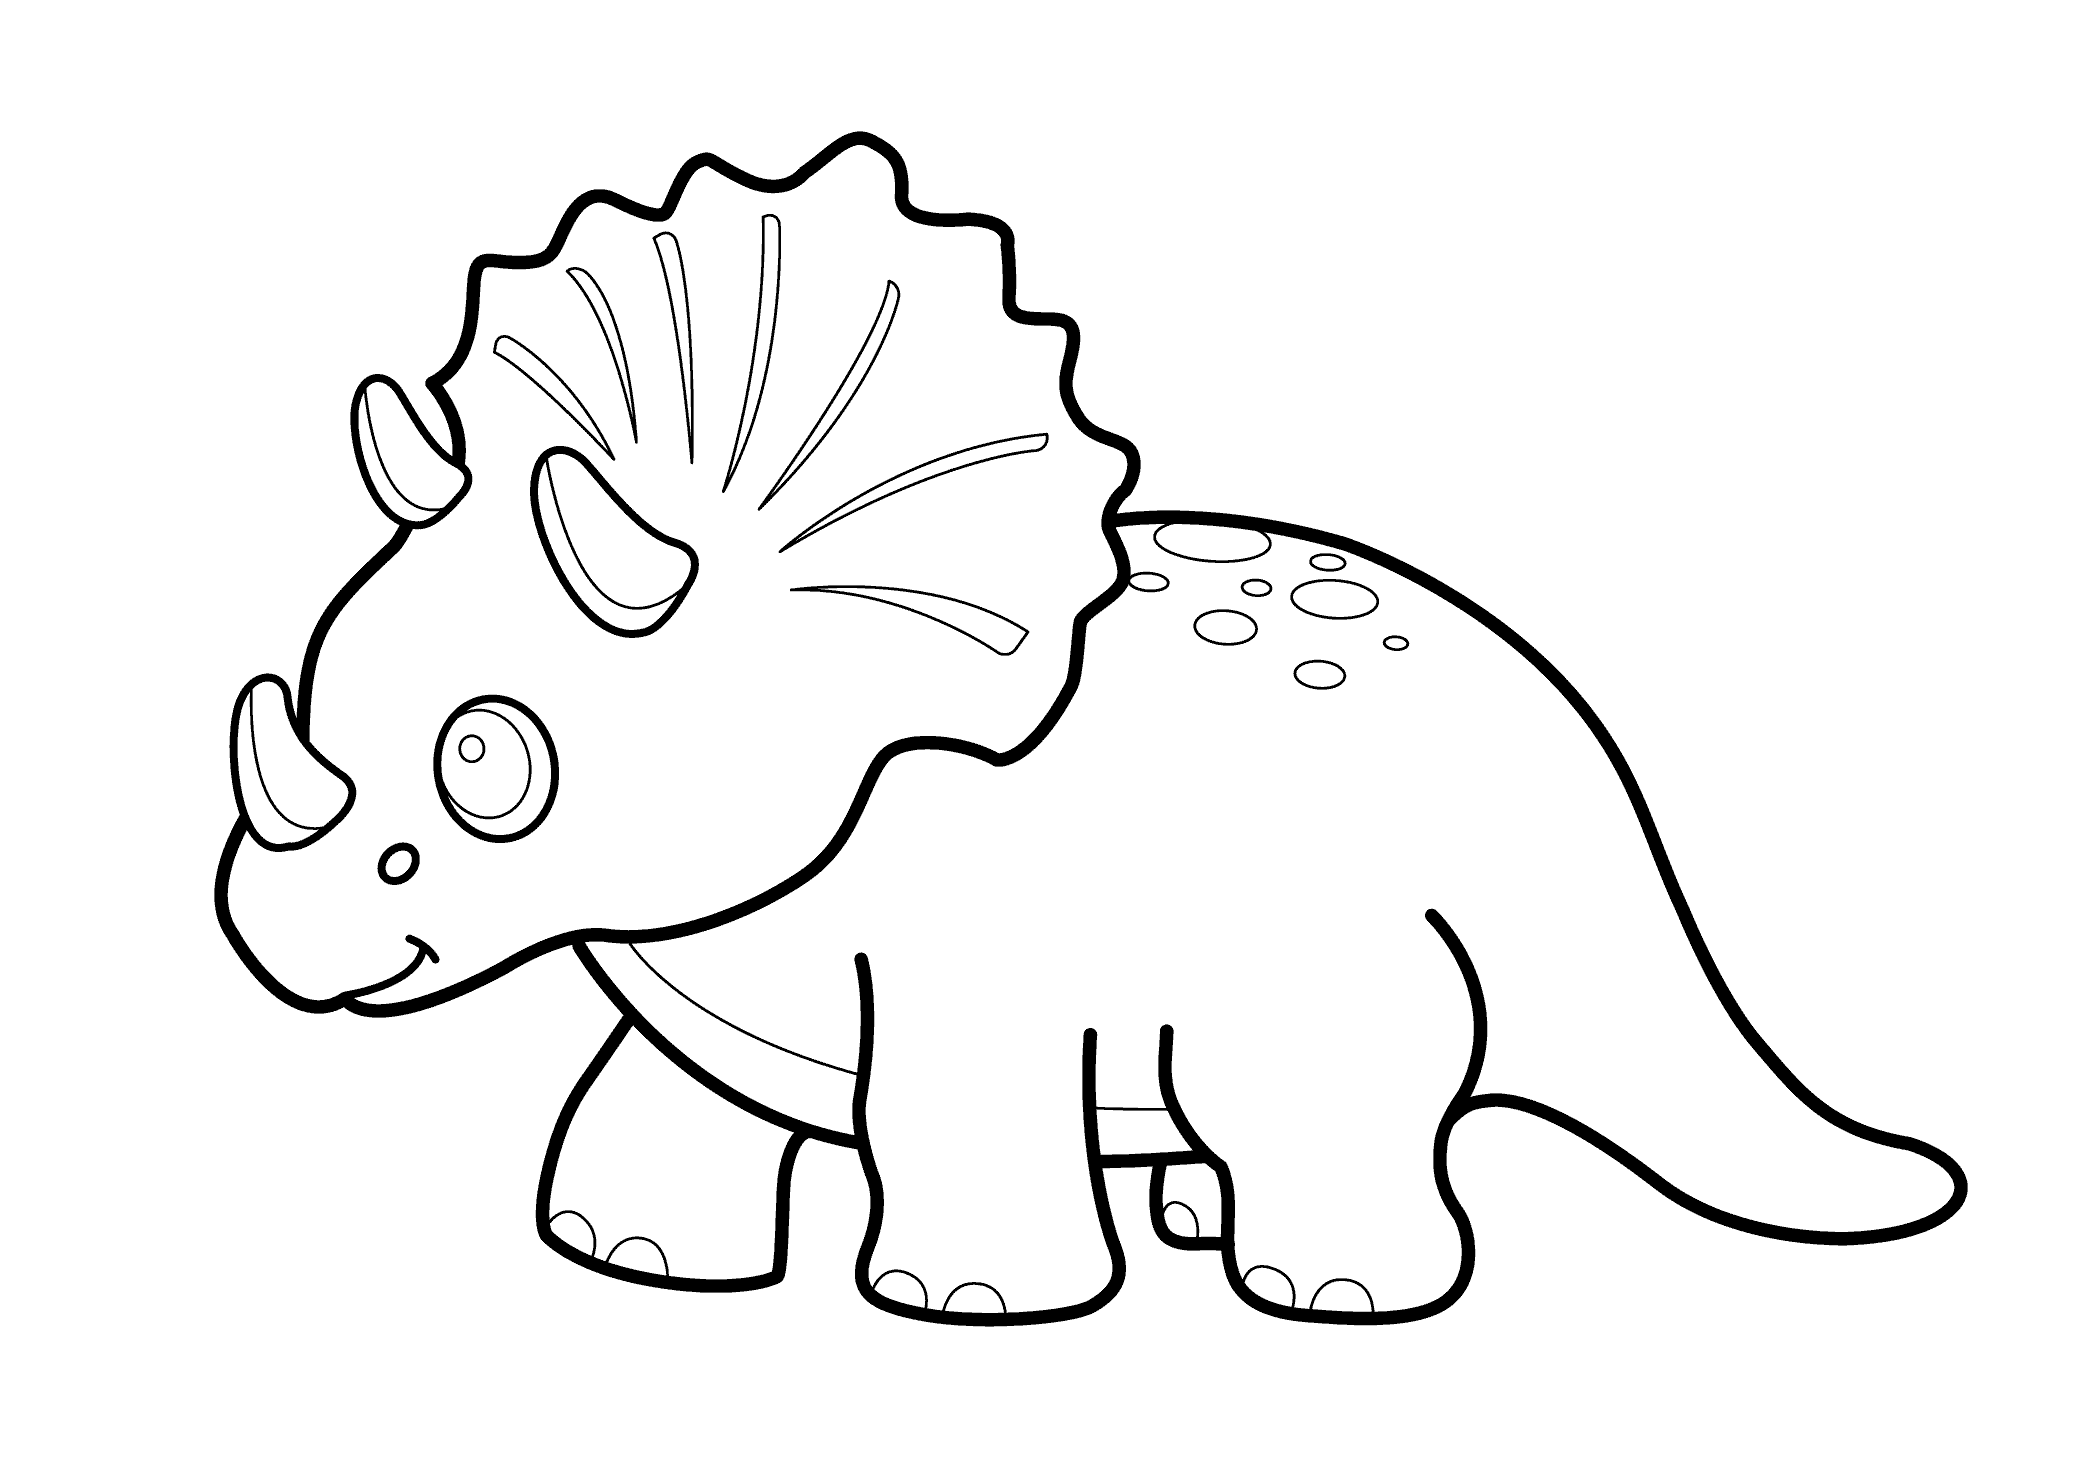 triceratops pictures to color funny dinosaur triceratops cartoon coloring pages for kids color triceratops to pictures 